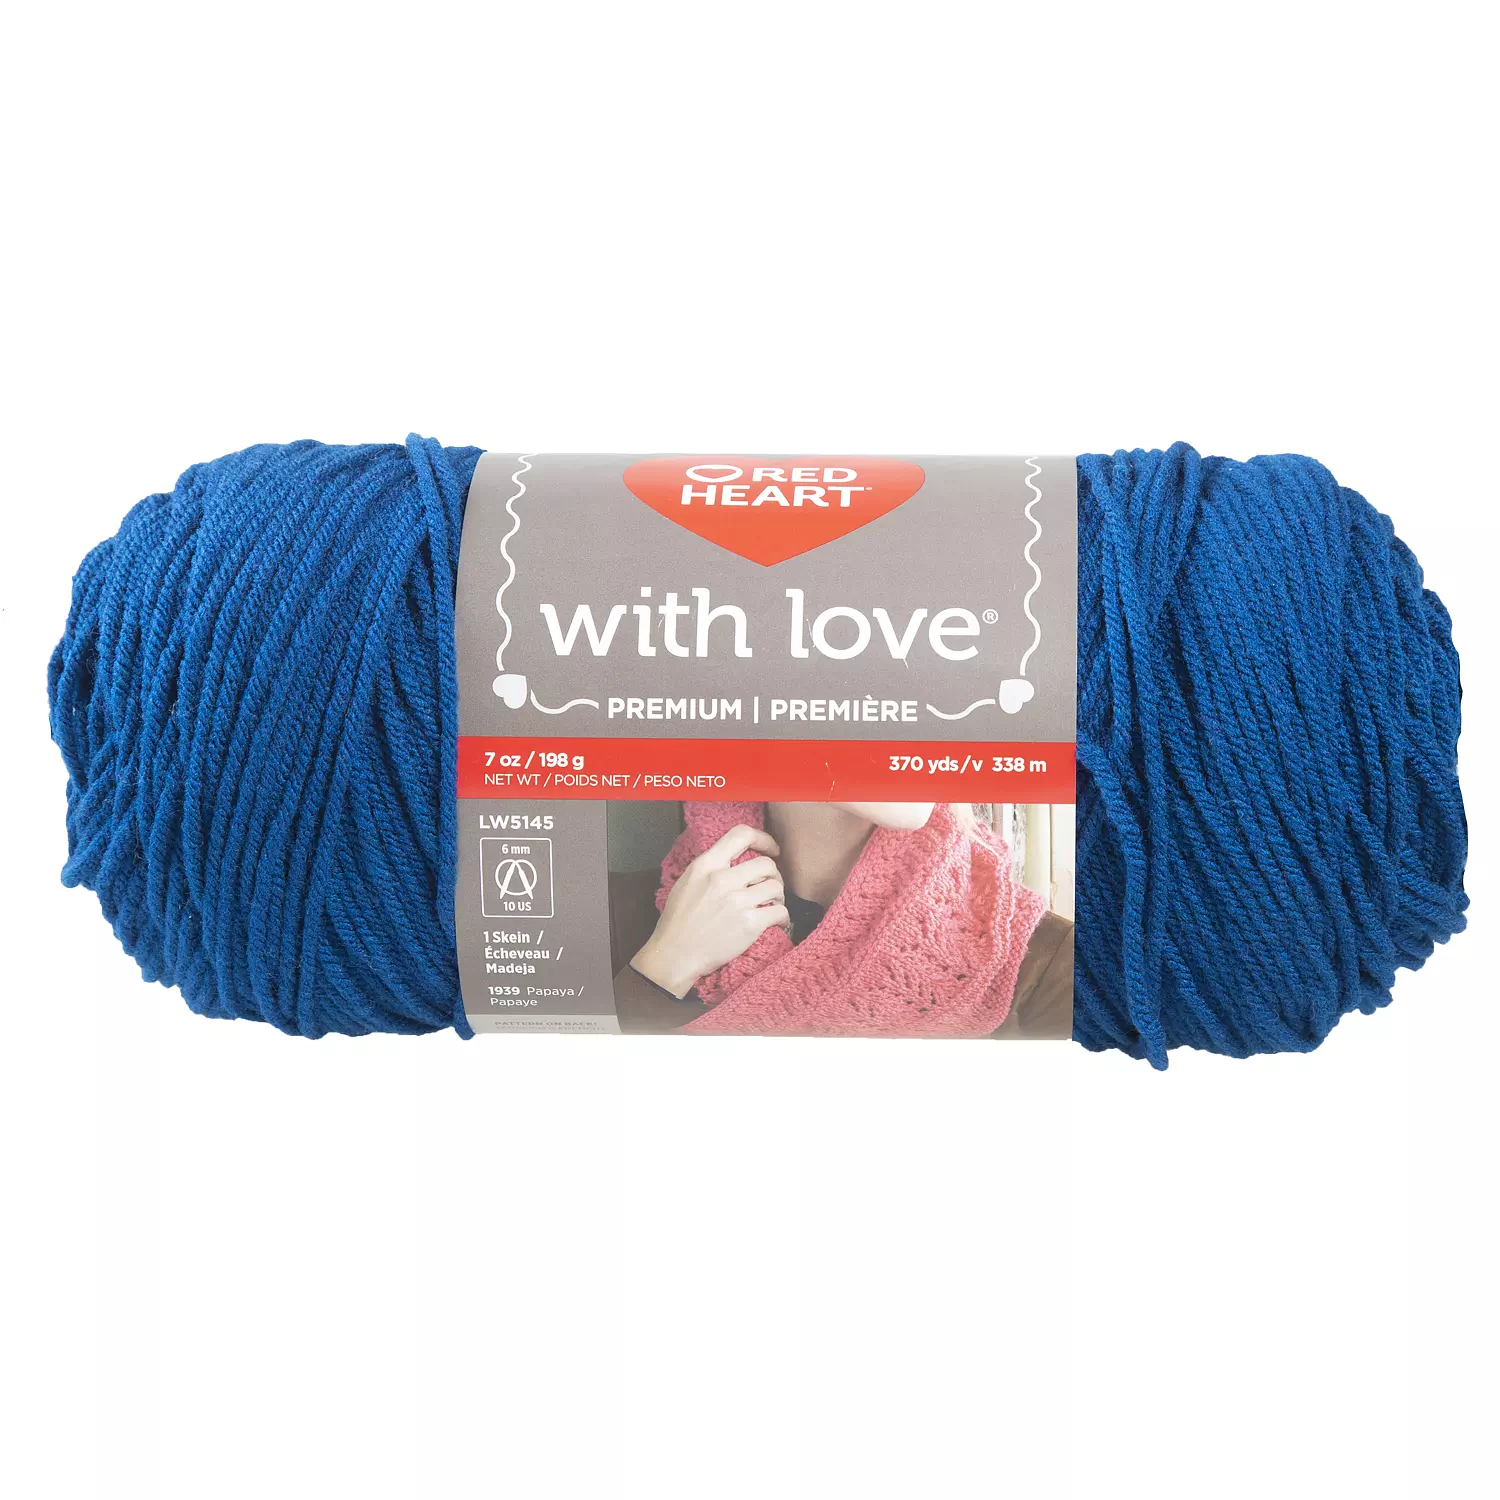 Red Heart with Love - Yarn, peacock. Colour: blue